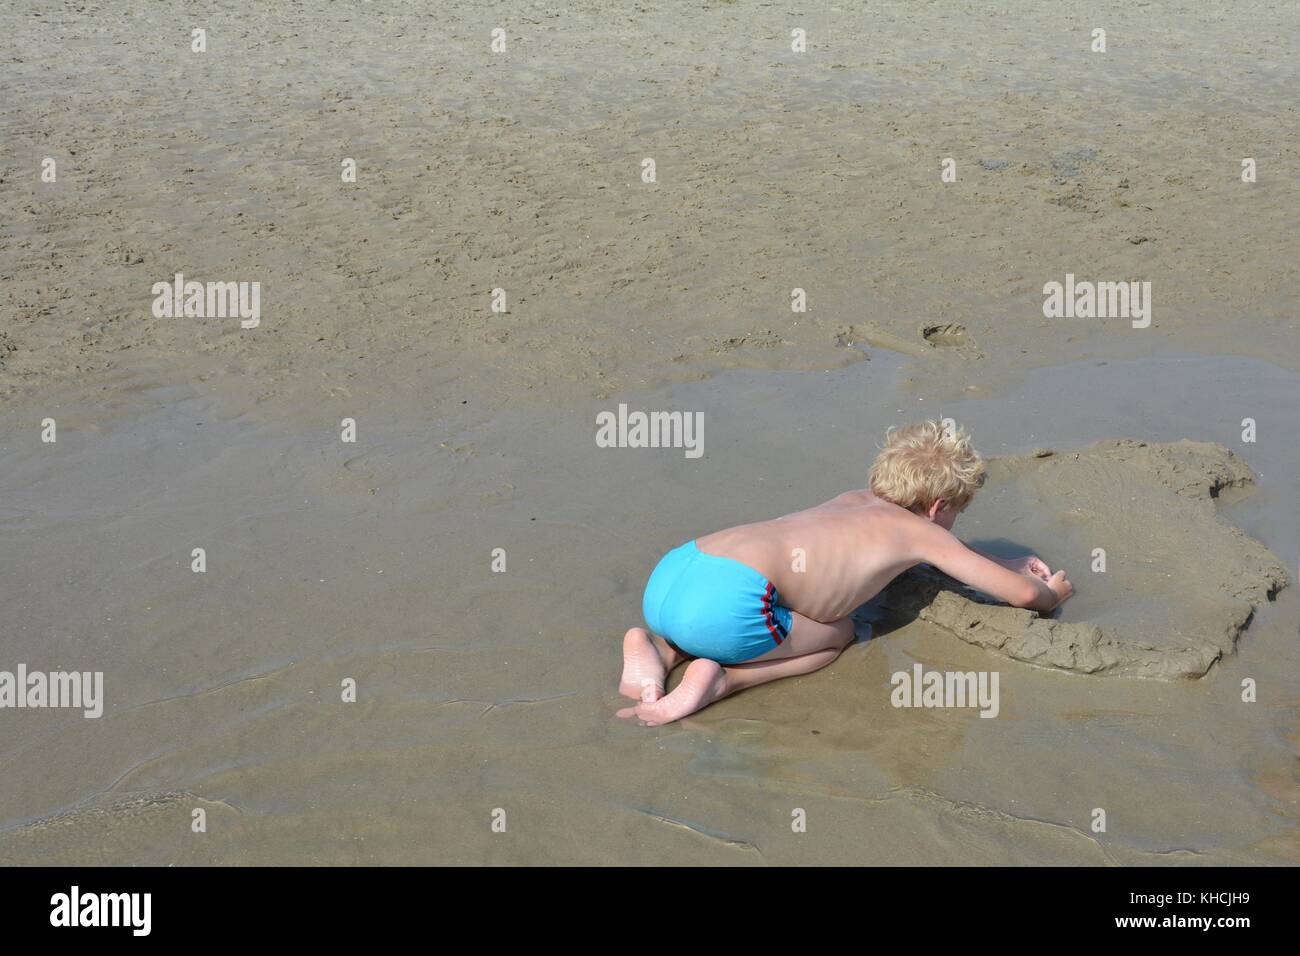 Small blond boy with swimming trunks plays in the sand on the beach Stock Photo